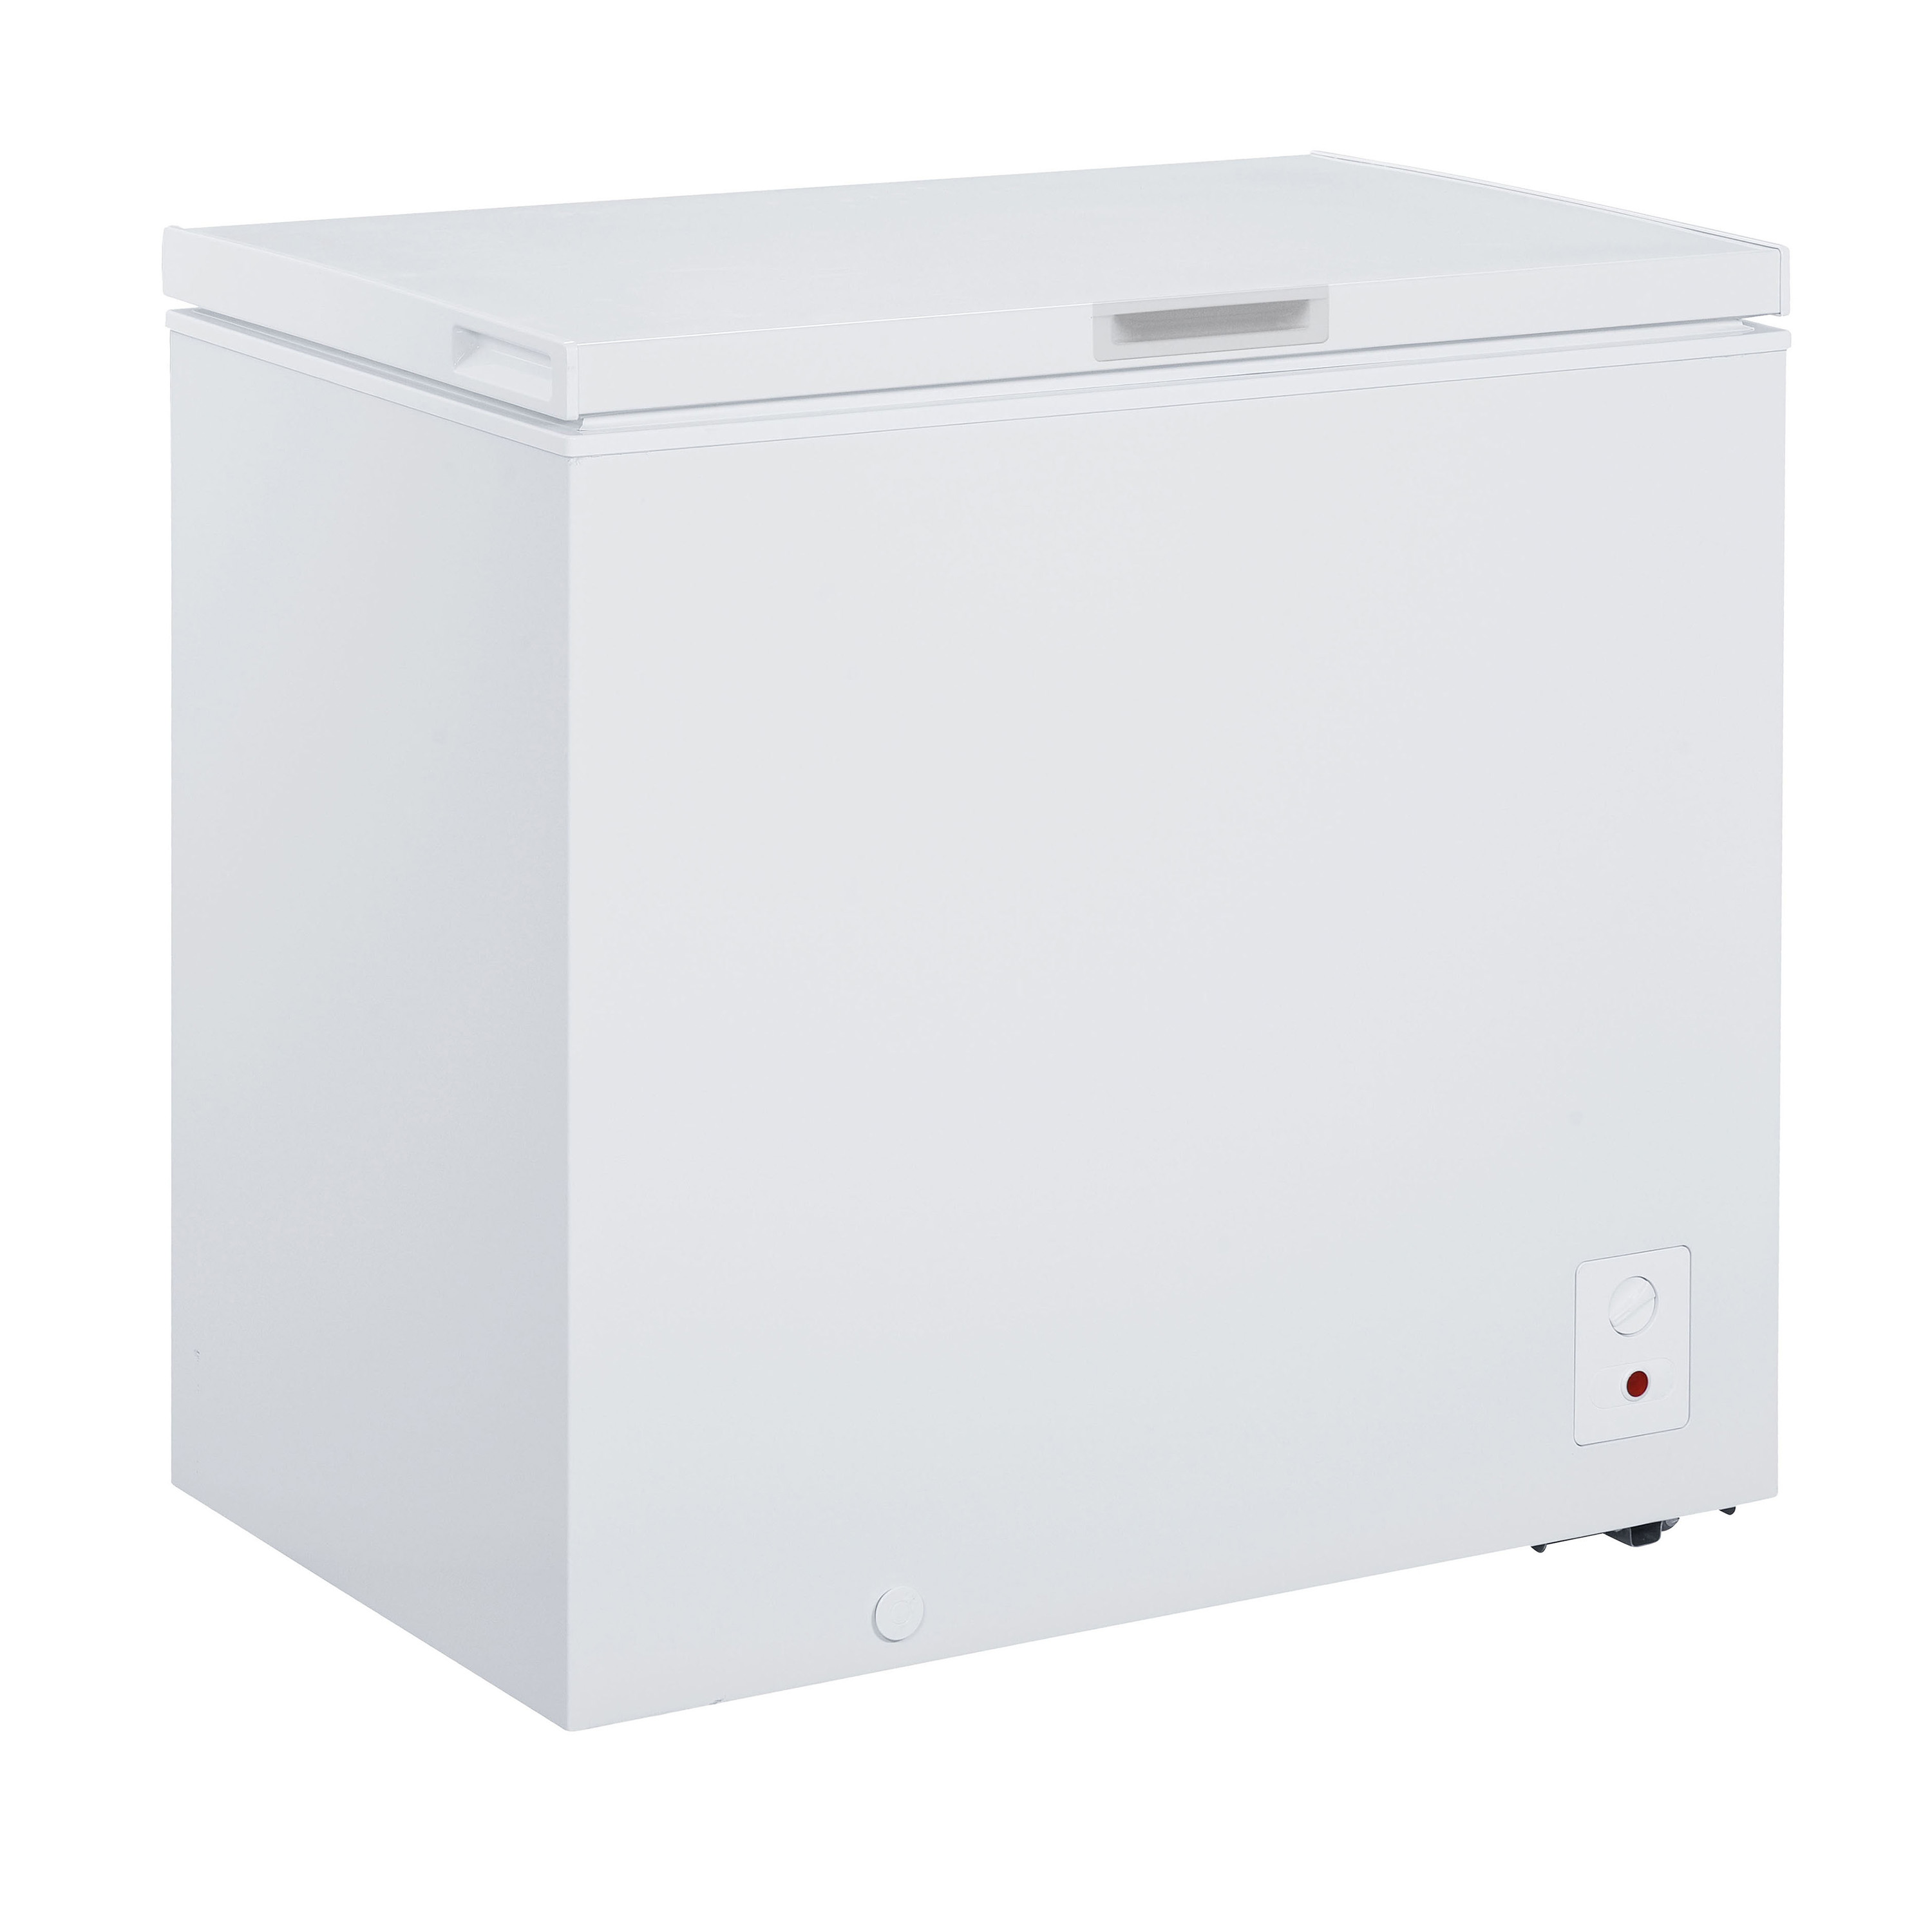 Magic Cool 7.0 Cu. ft. Chest Freezer, in White (MCCF7WI) - image 1 of 5